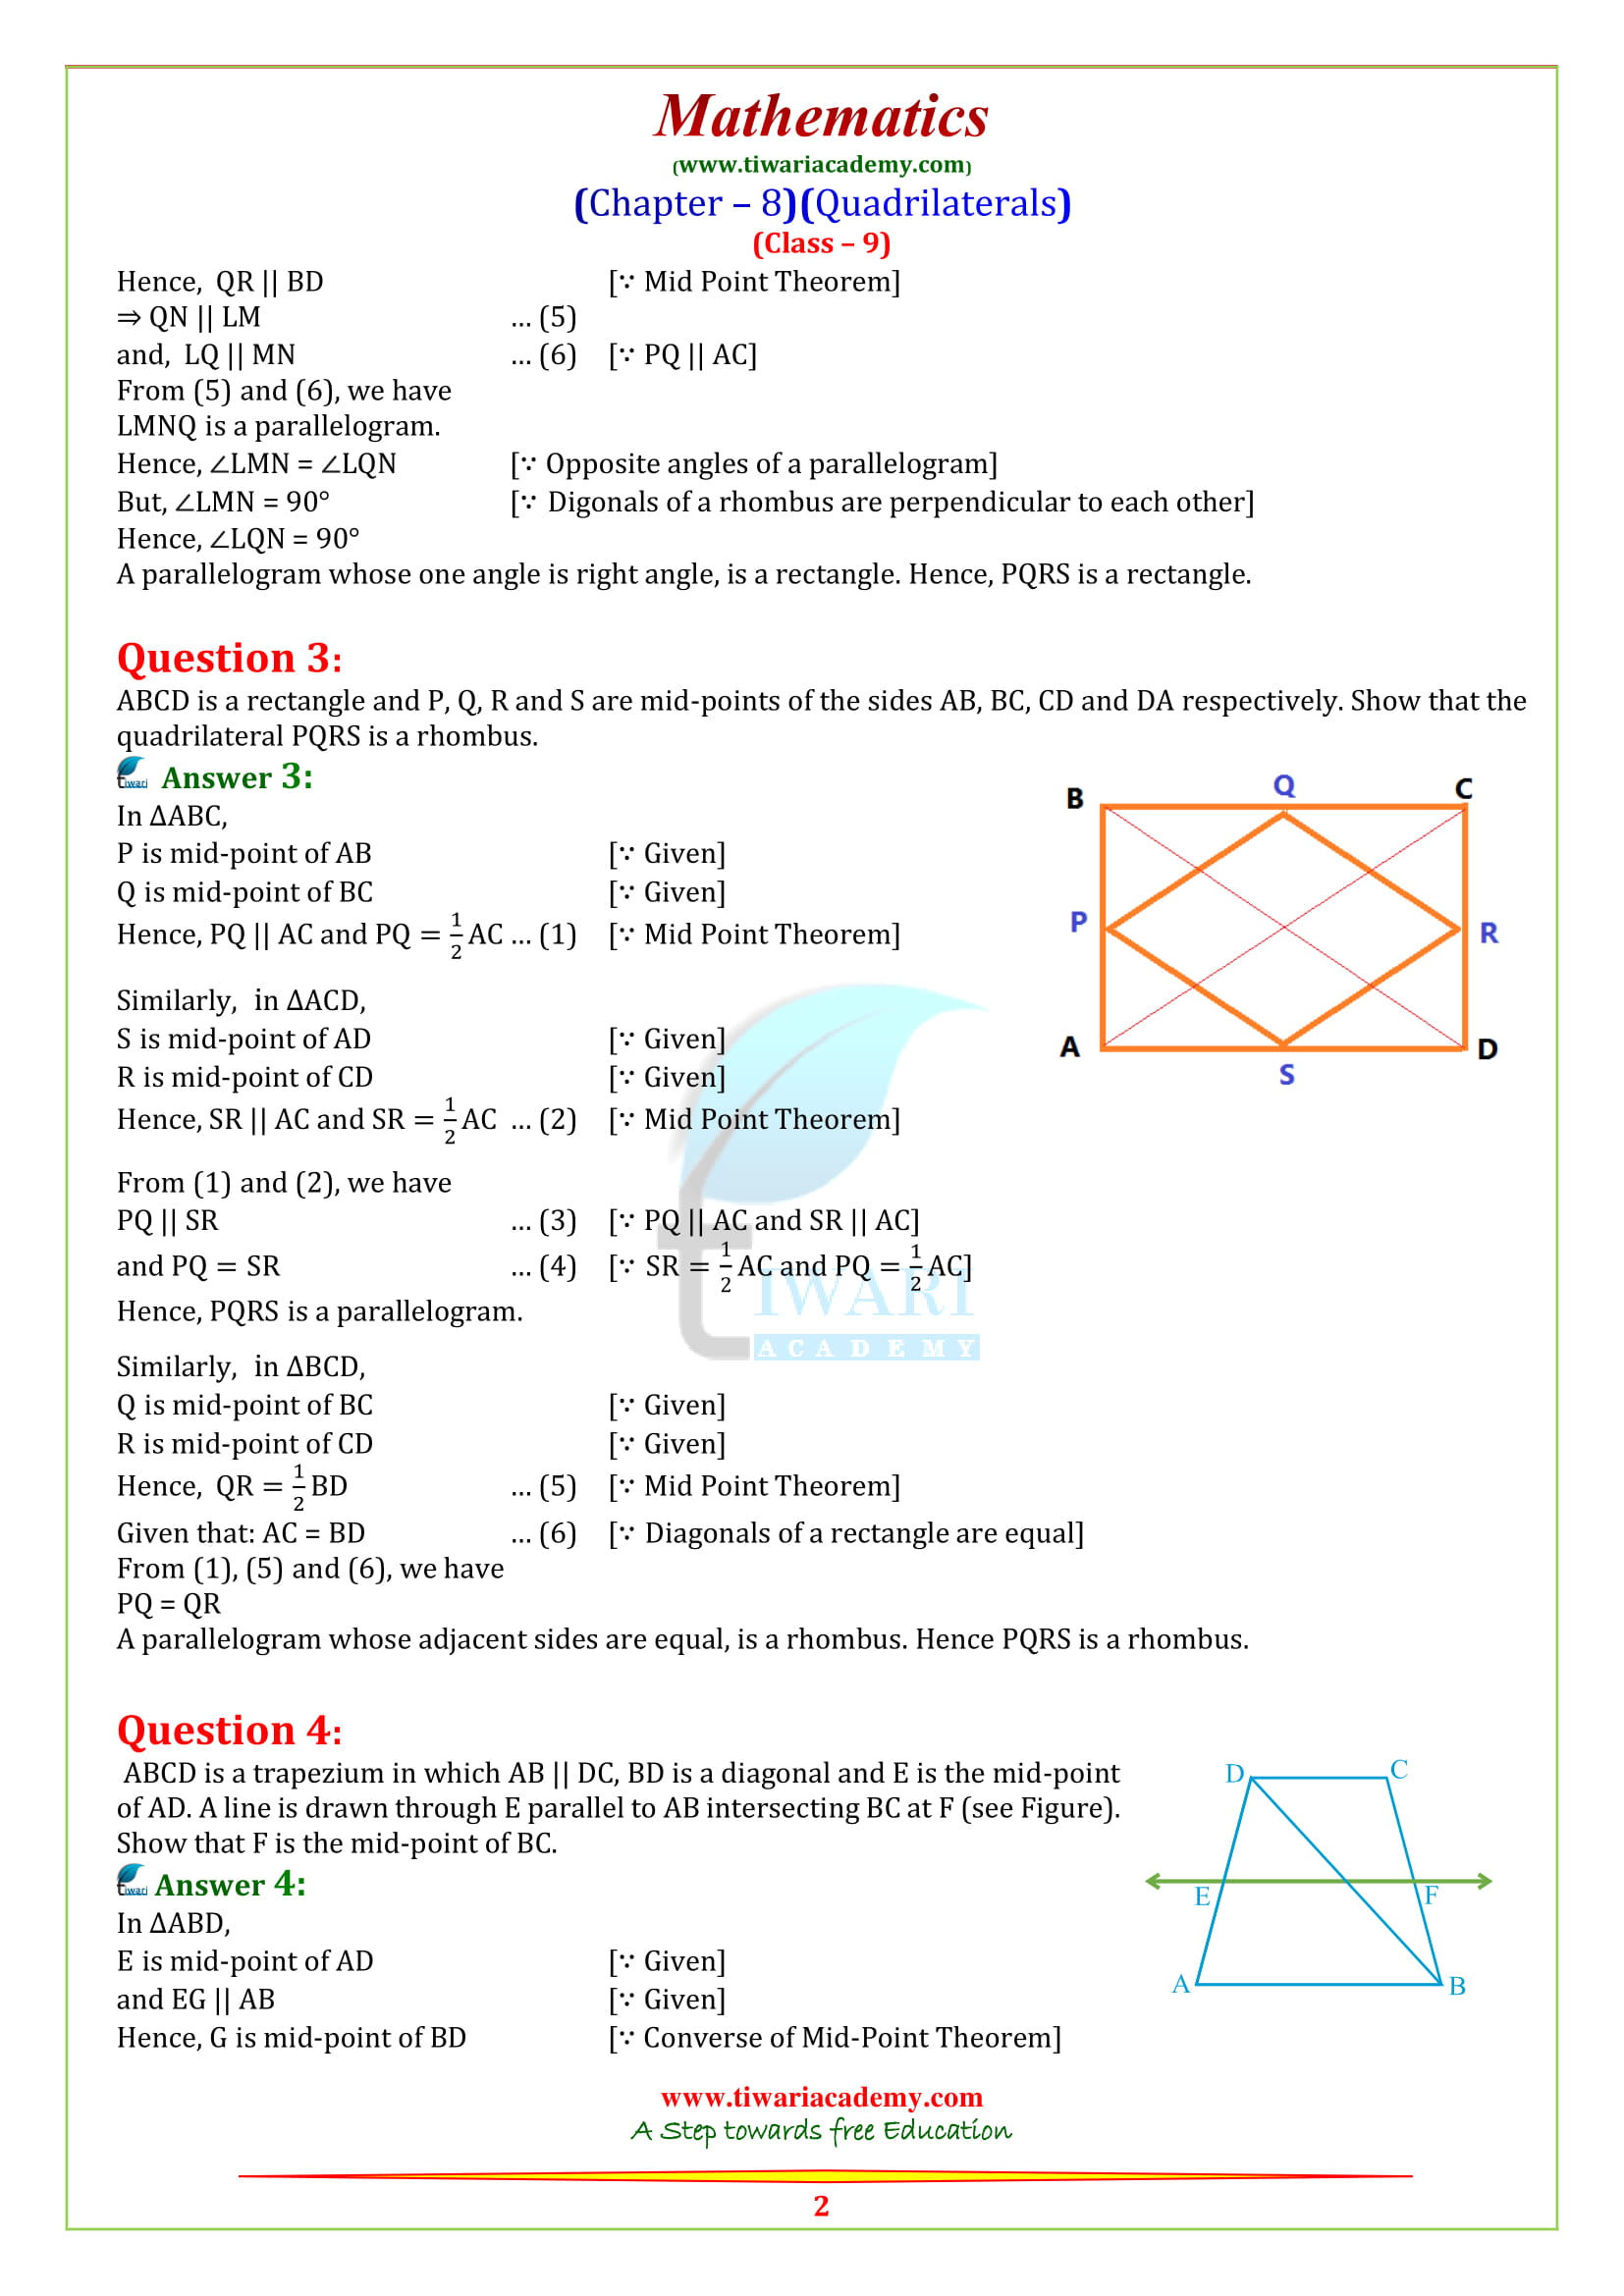 9 Maths chapter 8 Exercise 8.2 solutions in English medium